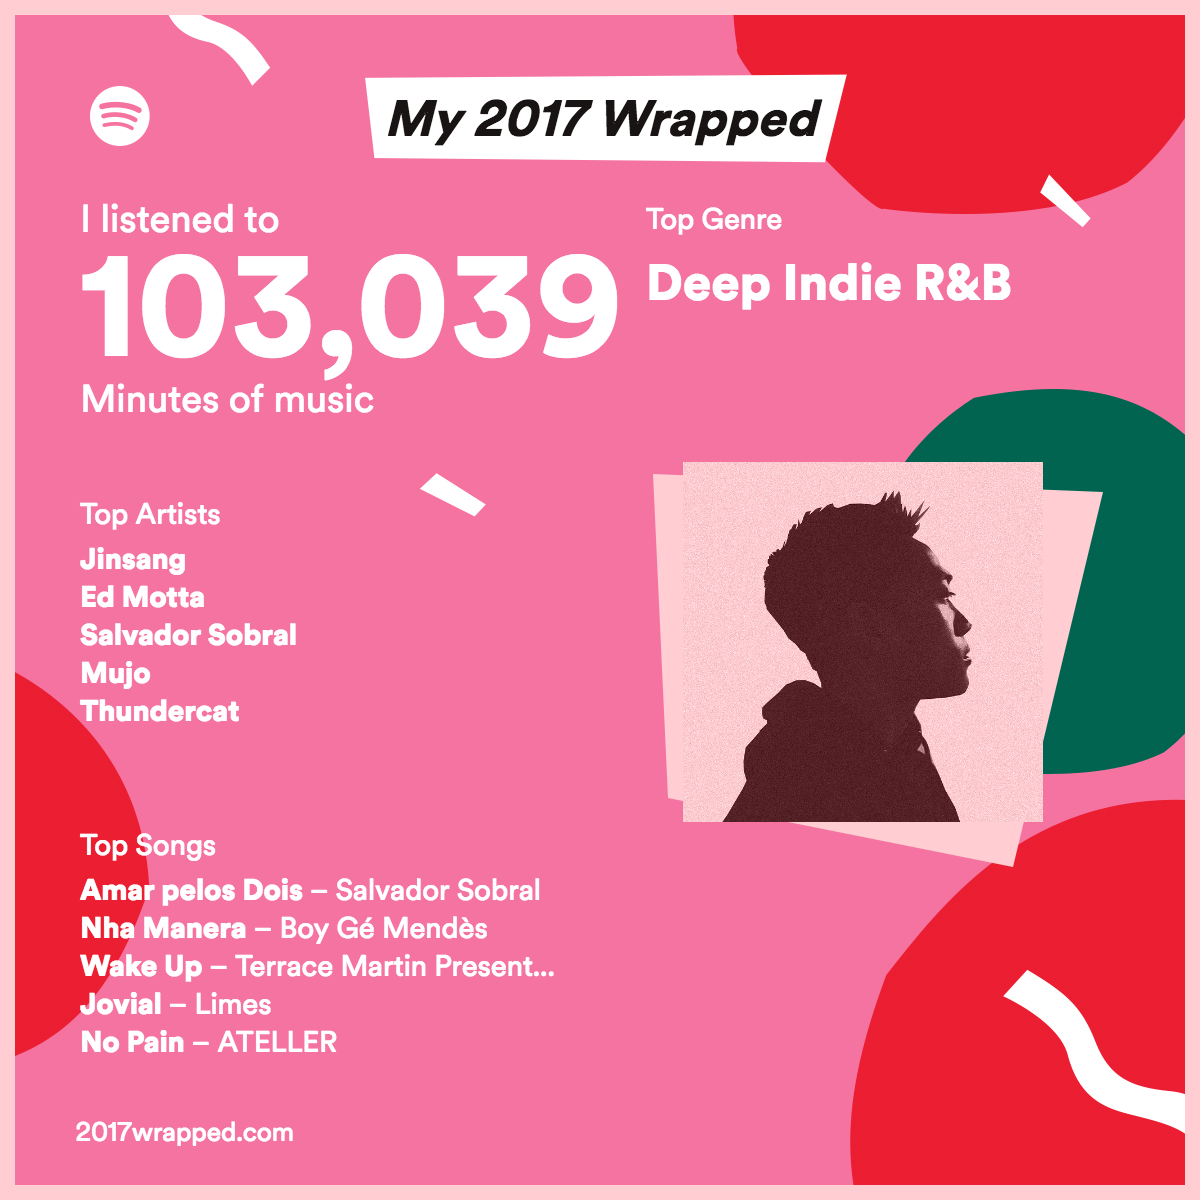 Your 2017 Wrapped - The Spotify Community